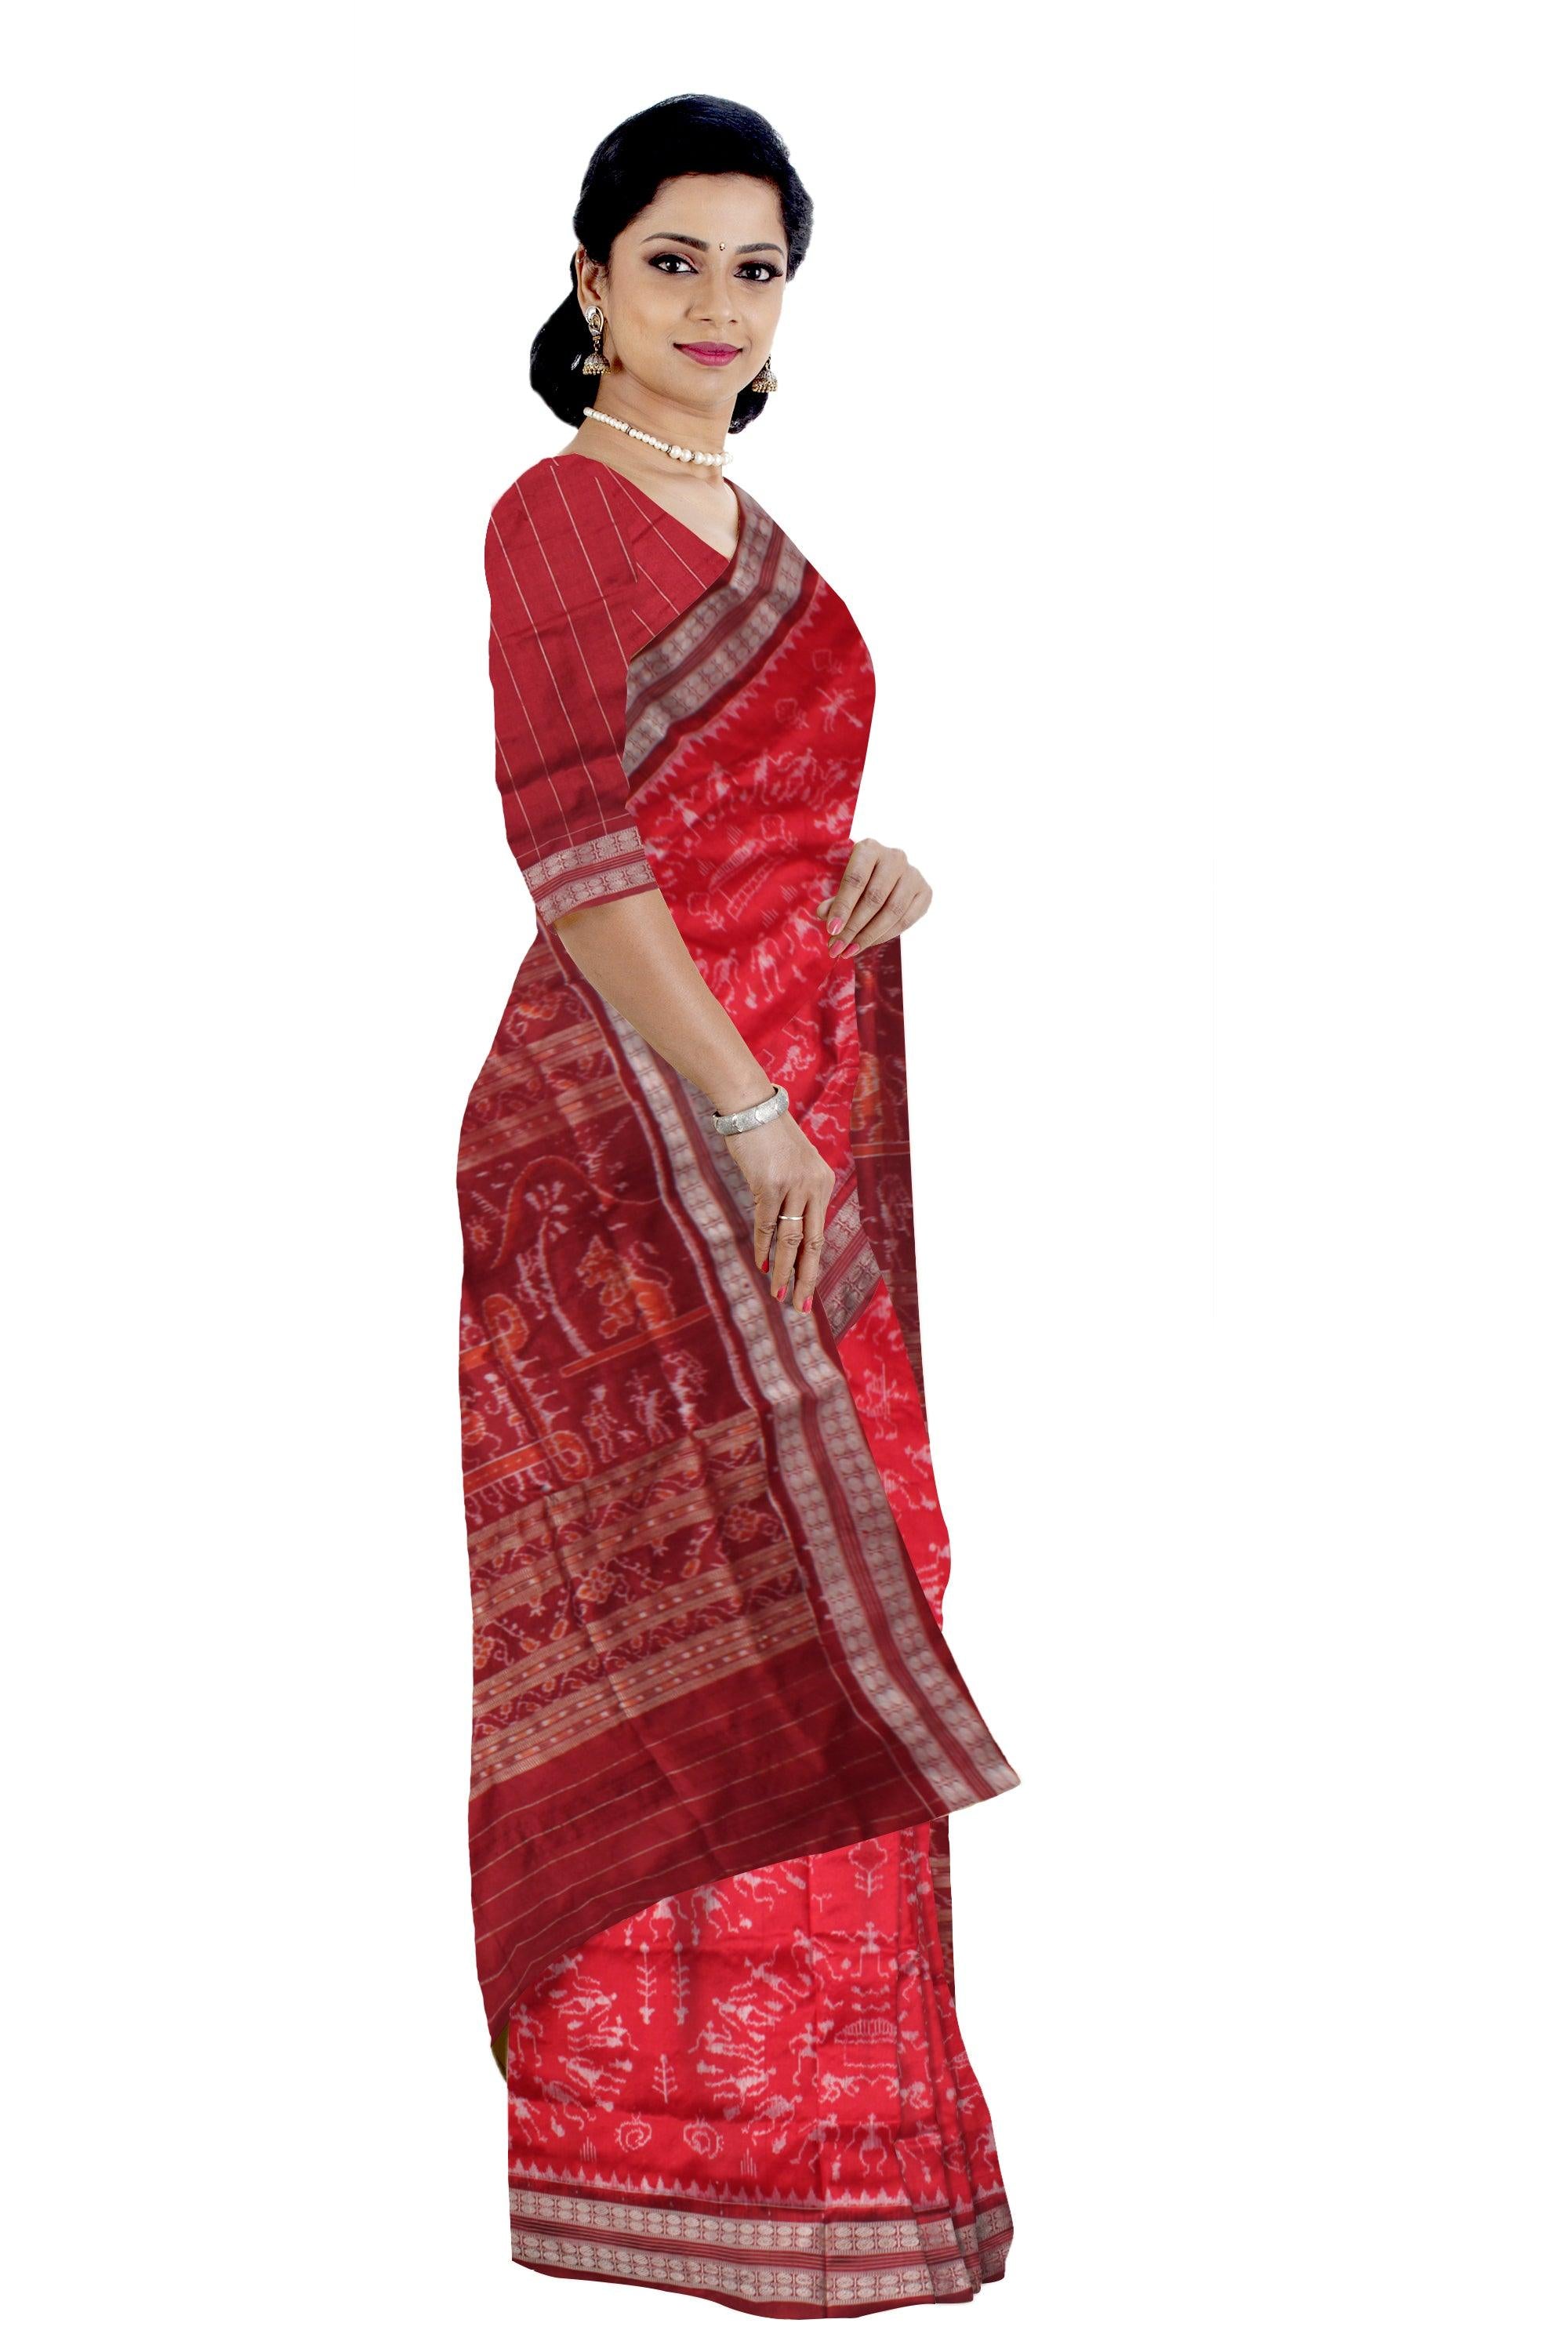 NEW PATTERN PANCHA KUTI TERRACOTTA PATTERN PURE SILK SAREE IS RED AND MAROON COLOR BASE, COMES WITH MATCHING BLOUSE PIECE. - Koshali Arts & Crafts Enterprise